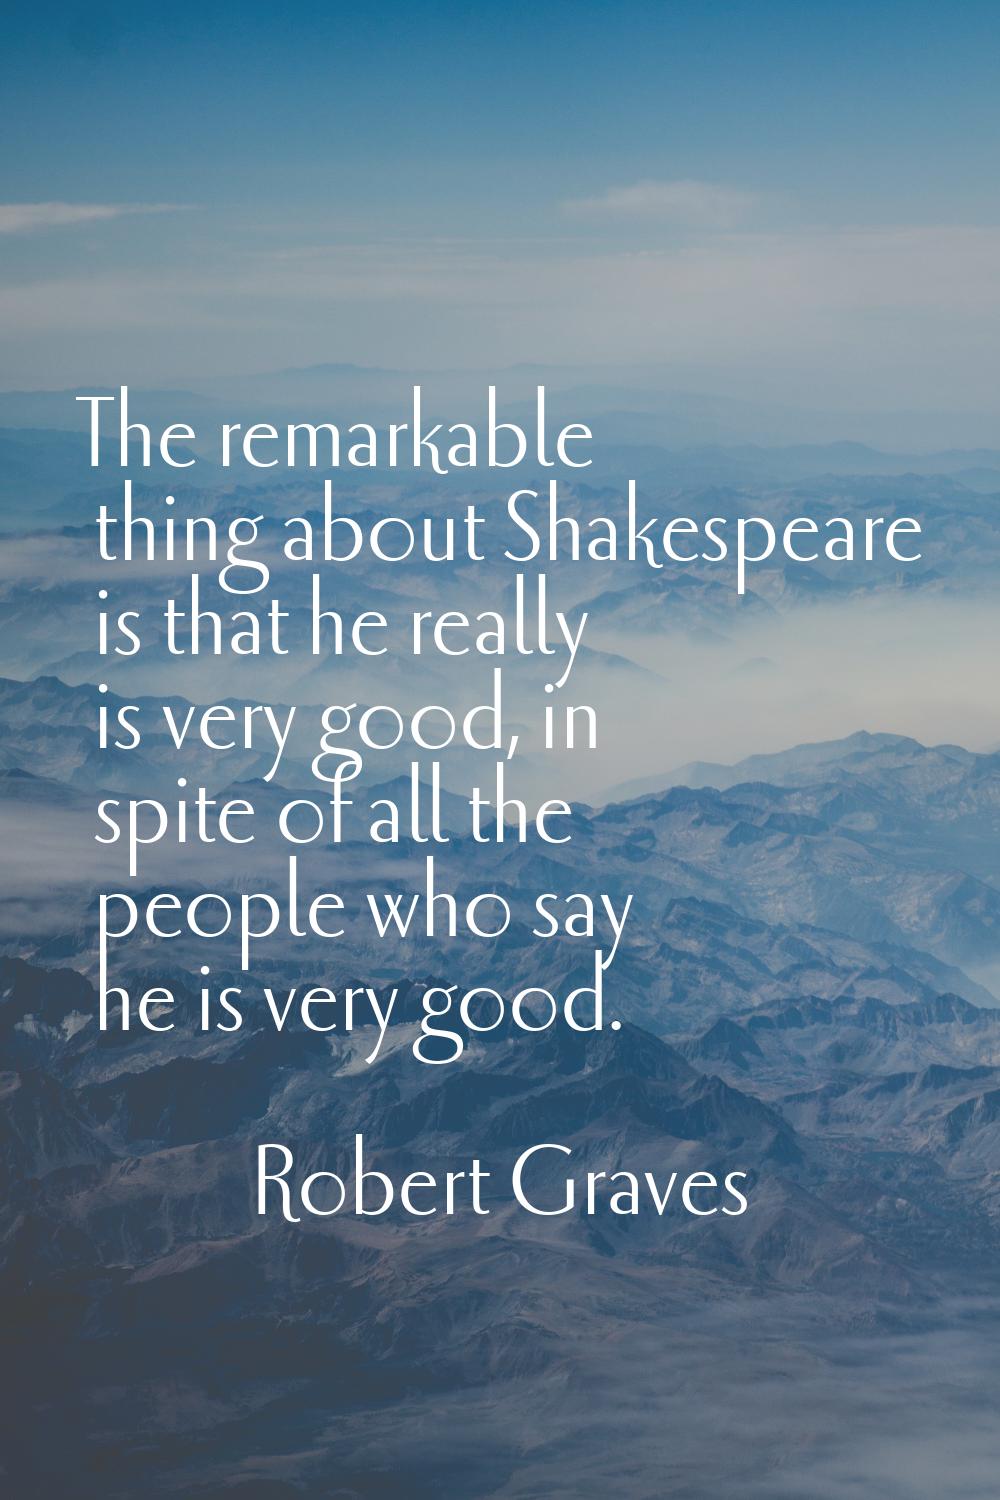 The remarkable thing about Shakespeare is that he really is very good, in spite of all the people w